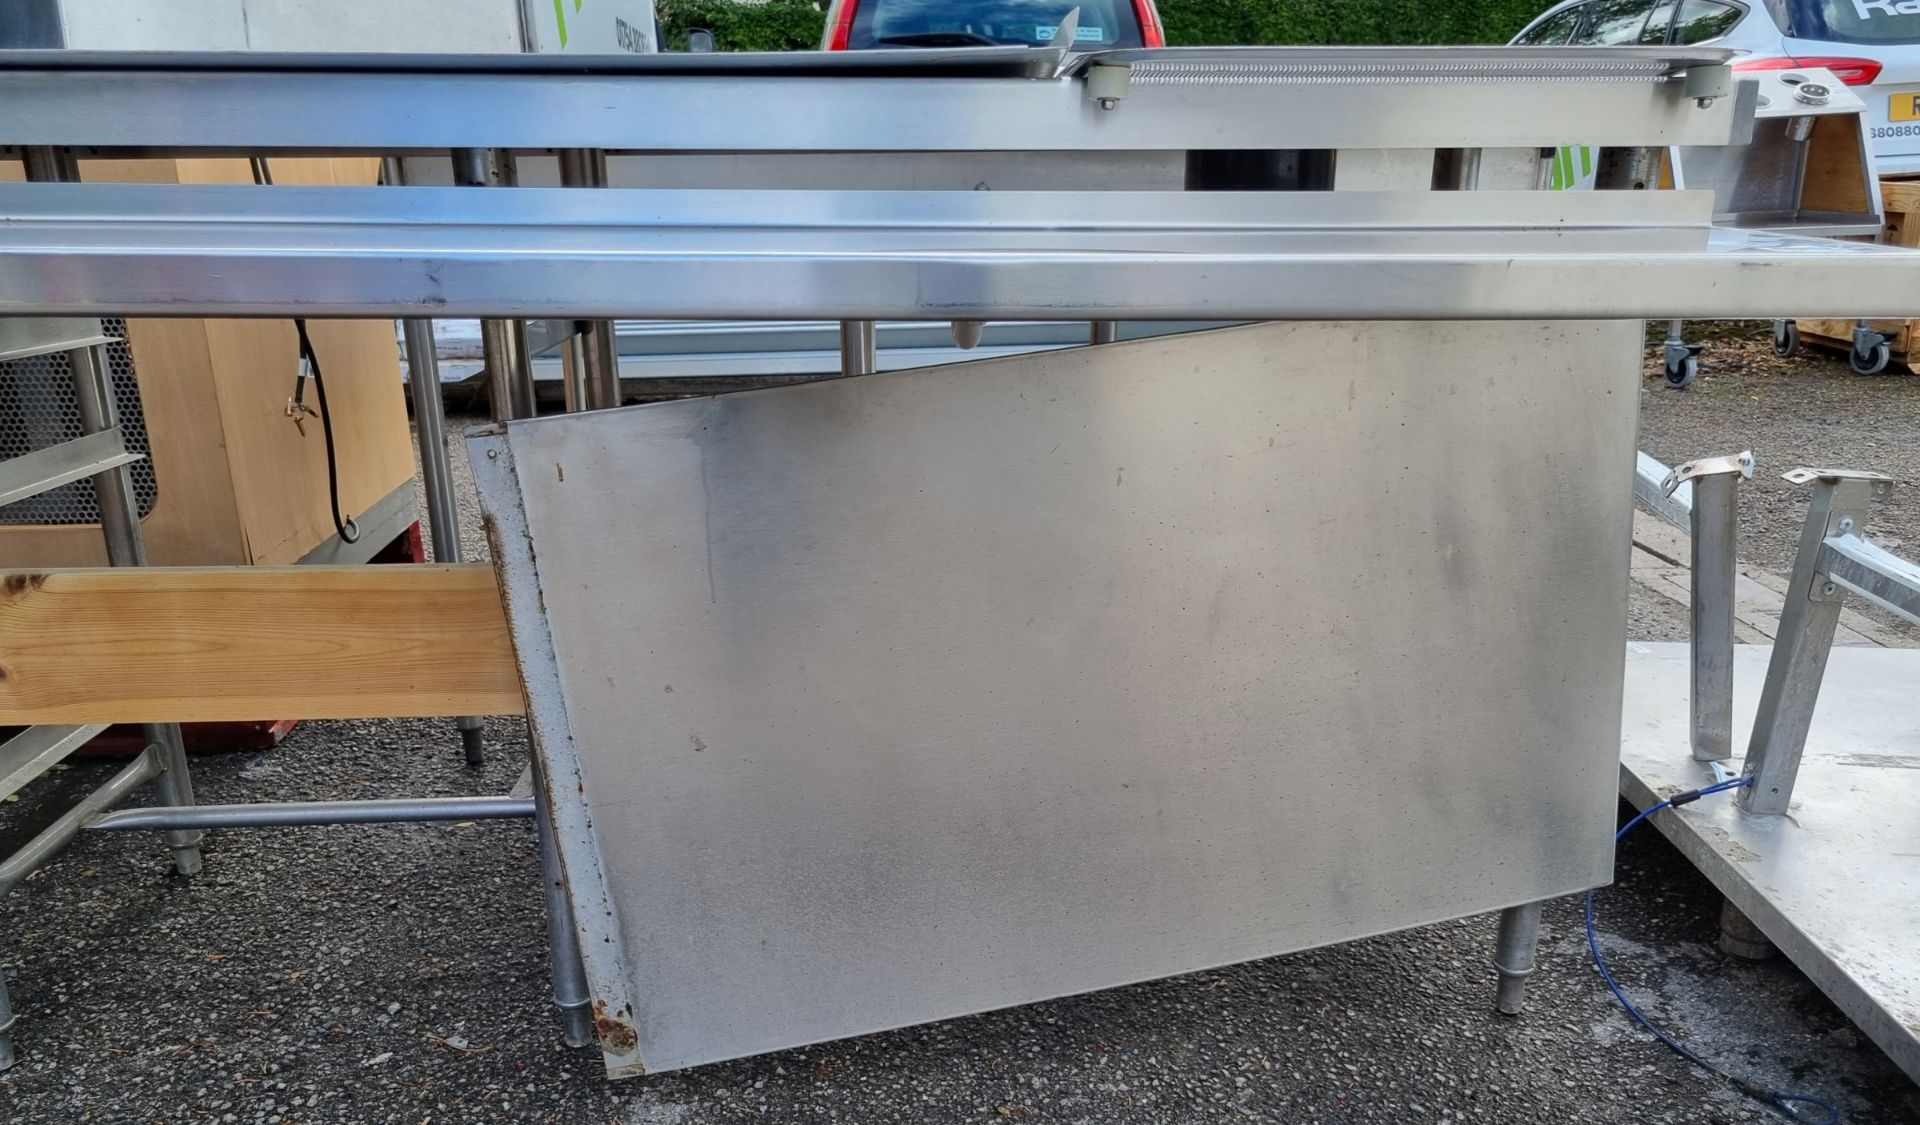 Stainless steel counter top unit with racking - W 3040 x D 900 x H 920mm - Image 5 of 5